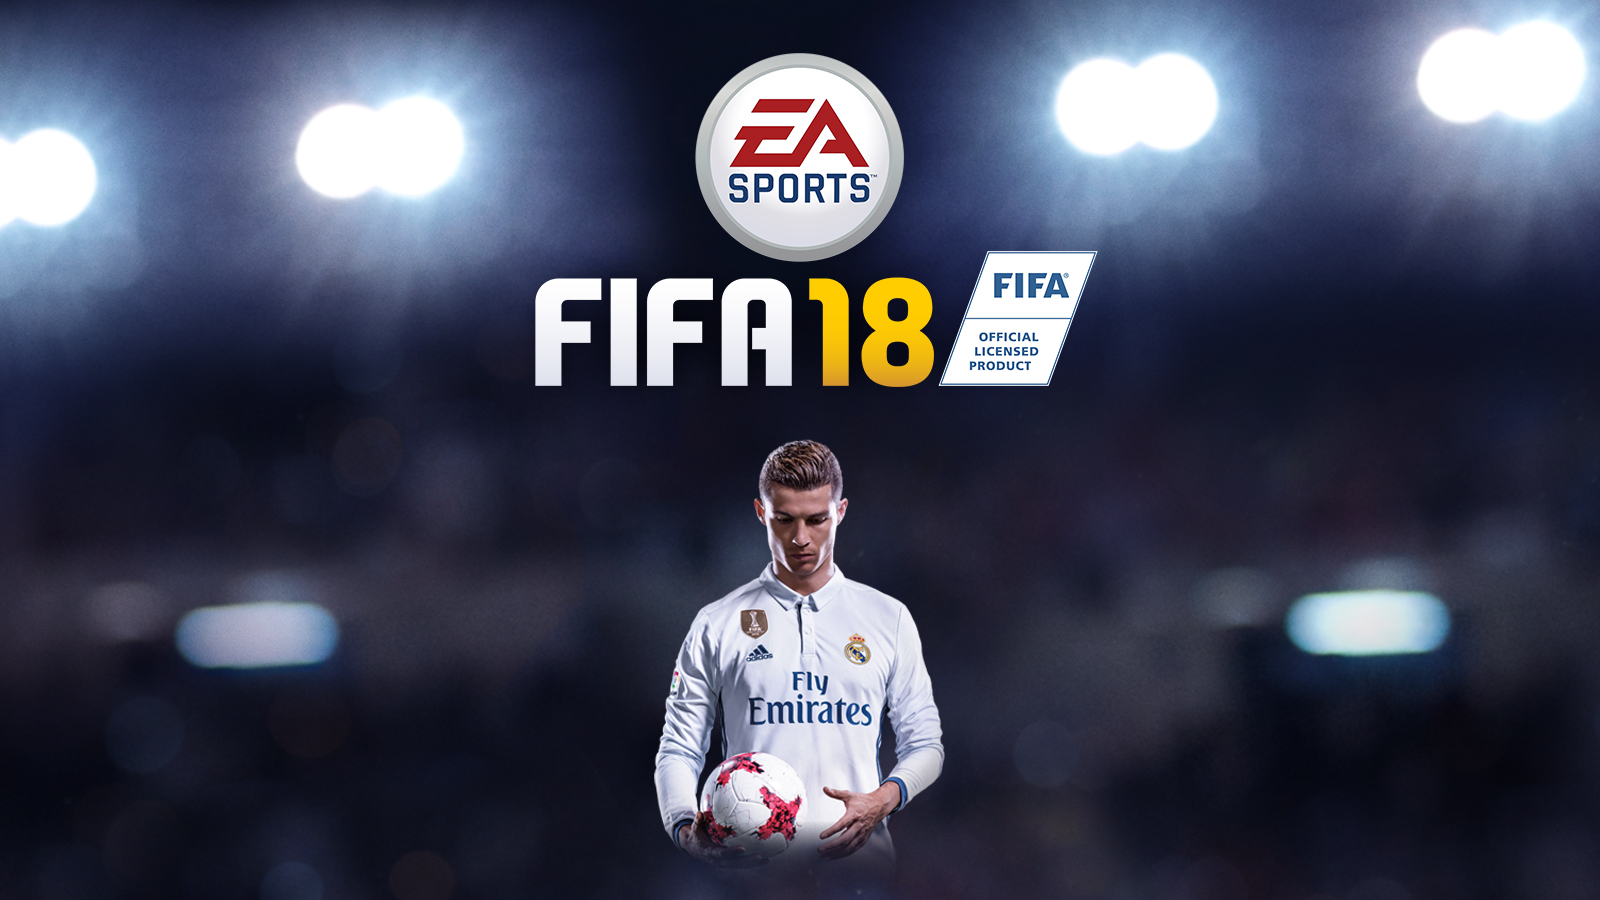 Free download EA SPORTS FIFA 18 Game PS4 PlayStation [1600x900] for your Desktop, Mobile & Tablet. Explore FIFA 18 Cover Wallpaper. FIFA 18 Cover Wallpaper, Adidas Telstar 18 FIFA World Cup Wallpaper, Wallpaper Mod 1.8